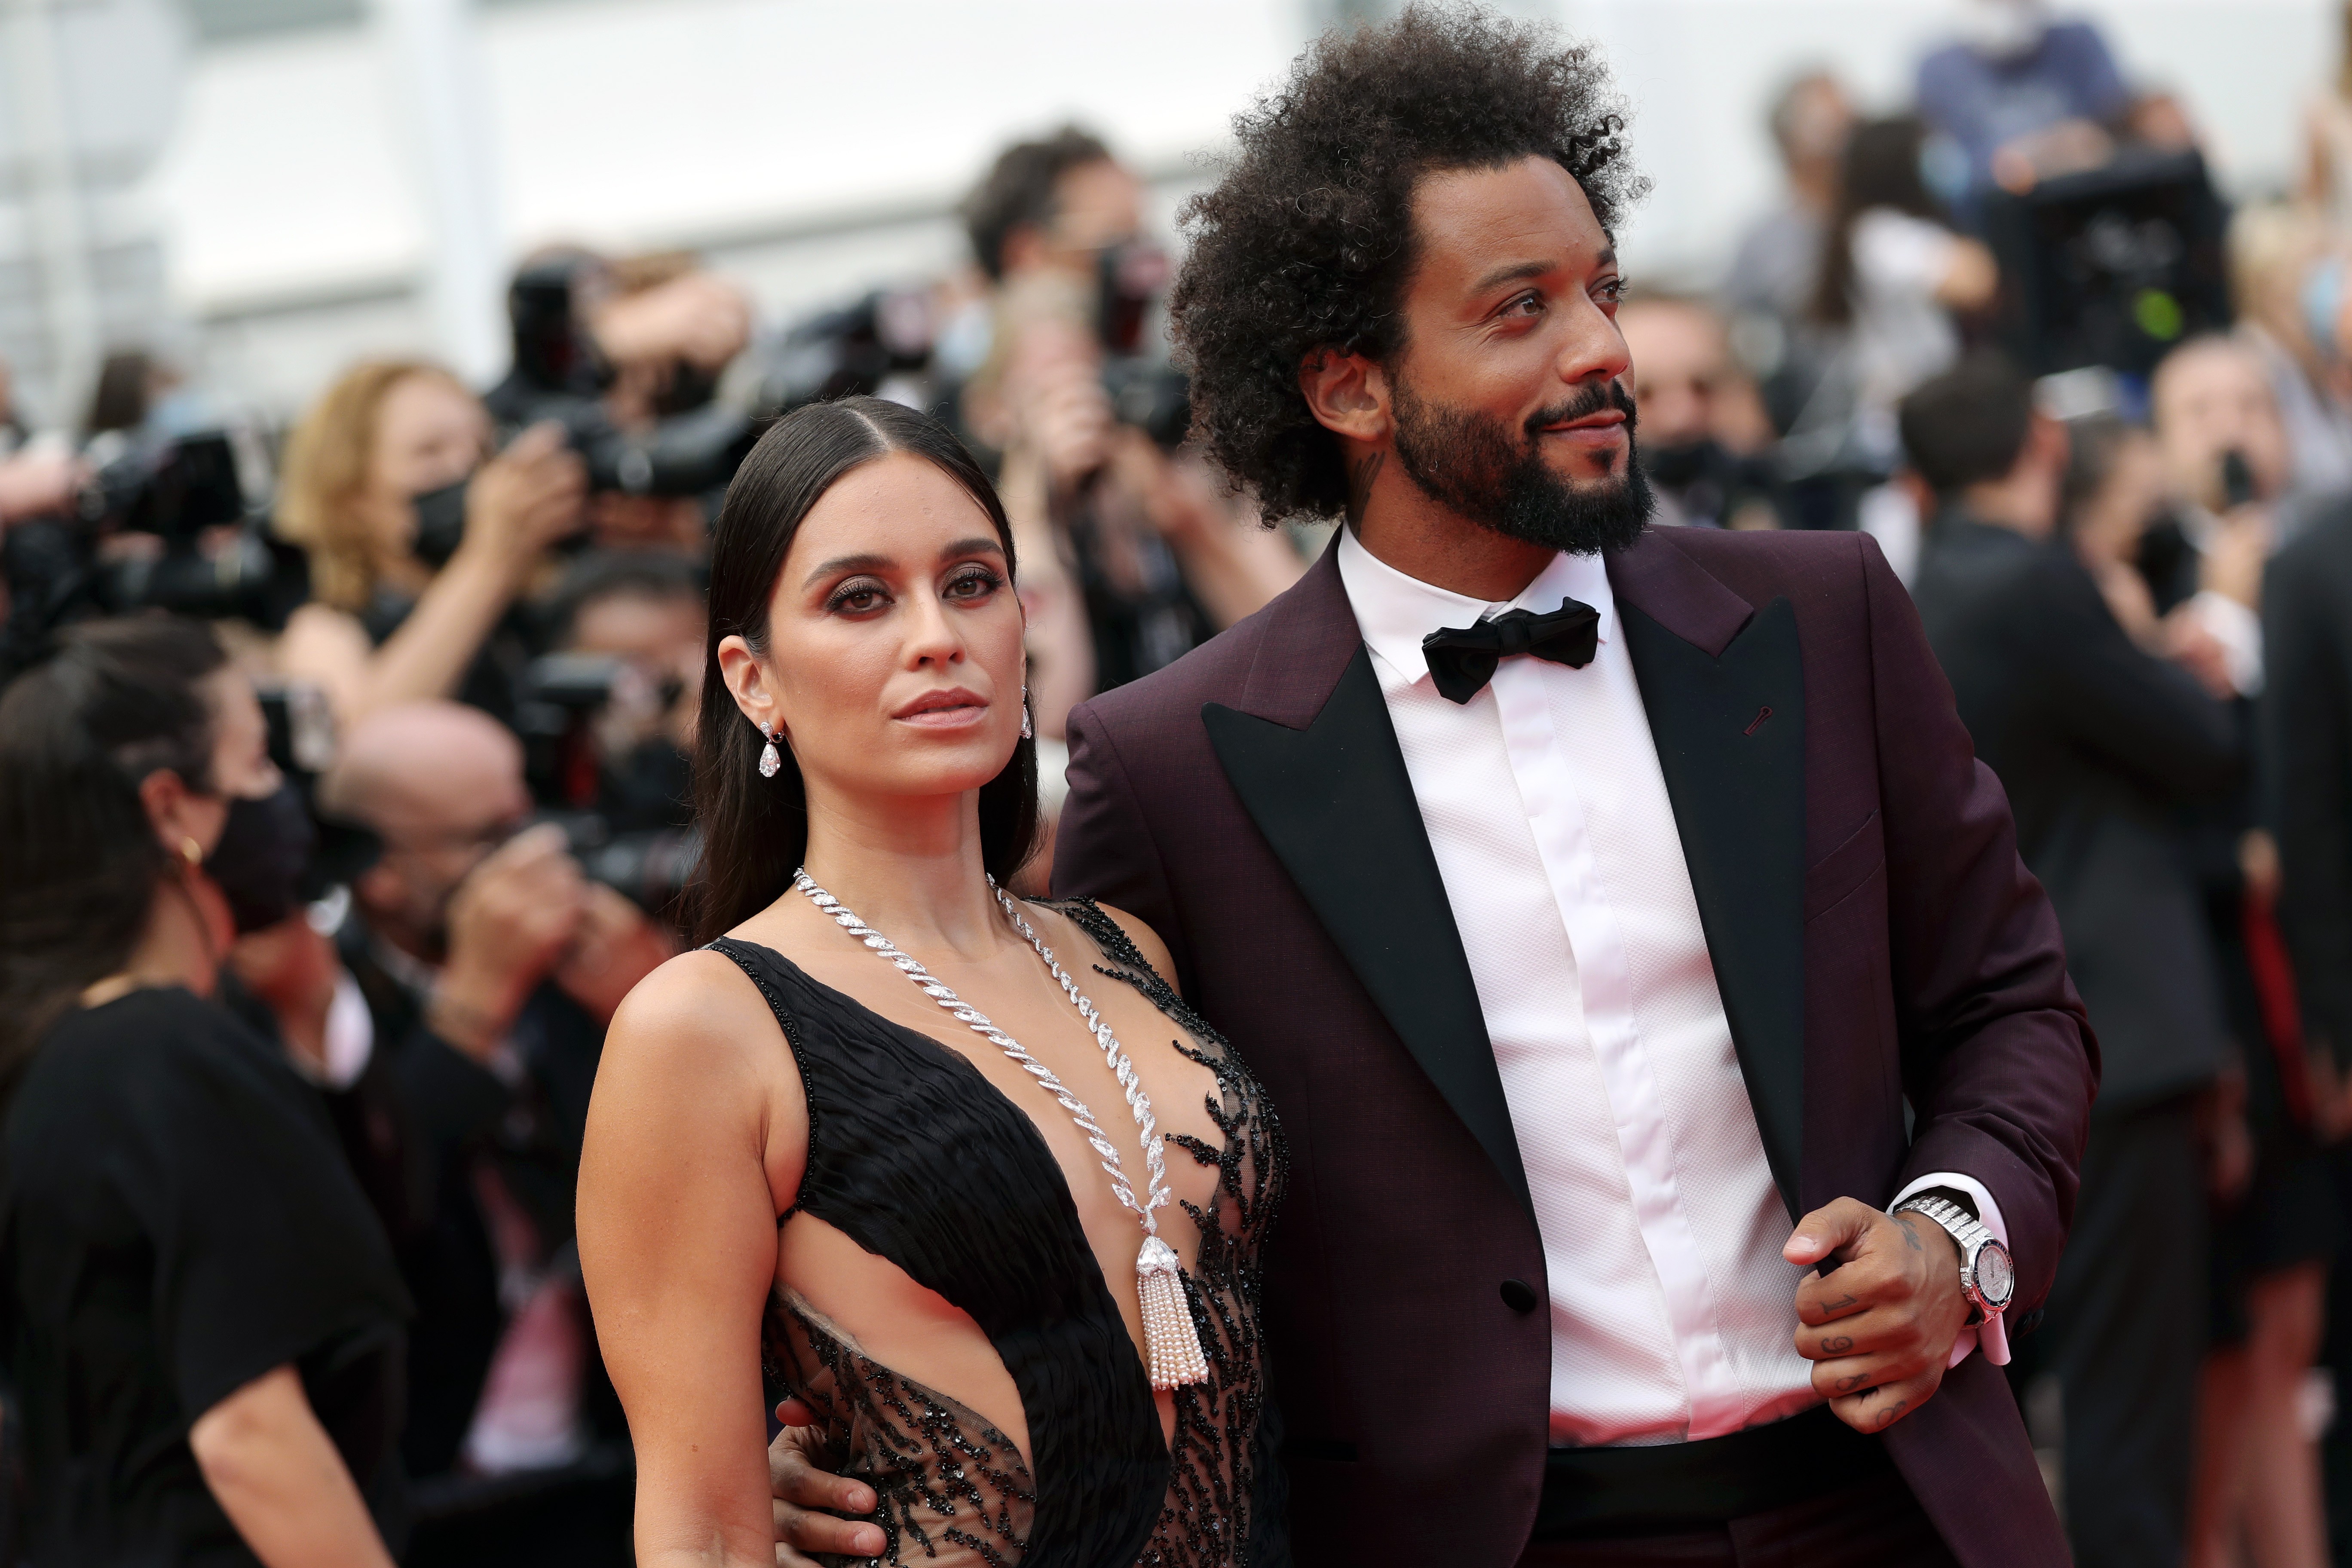 CANNES, FRANCE - JULY 12: Marcelo Vieira and wife Clarisse Alves attend the "The French Dispatch" screening during the 74th annual Cannes Film Festival on July 12, 2021 in Cannes, France. (Photo by Vittorio Zunino Celotto/Getty Images for Kering) (Foto: Getty Images for Kering)